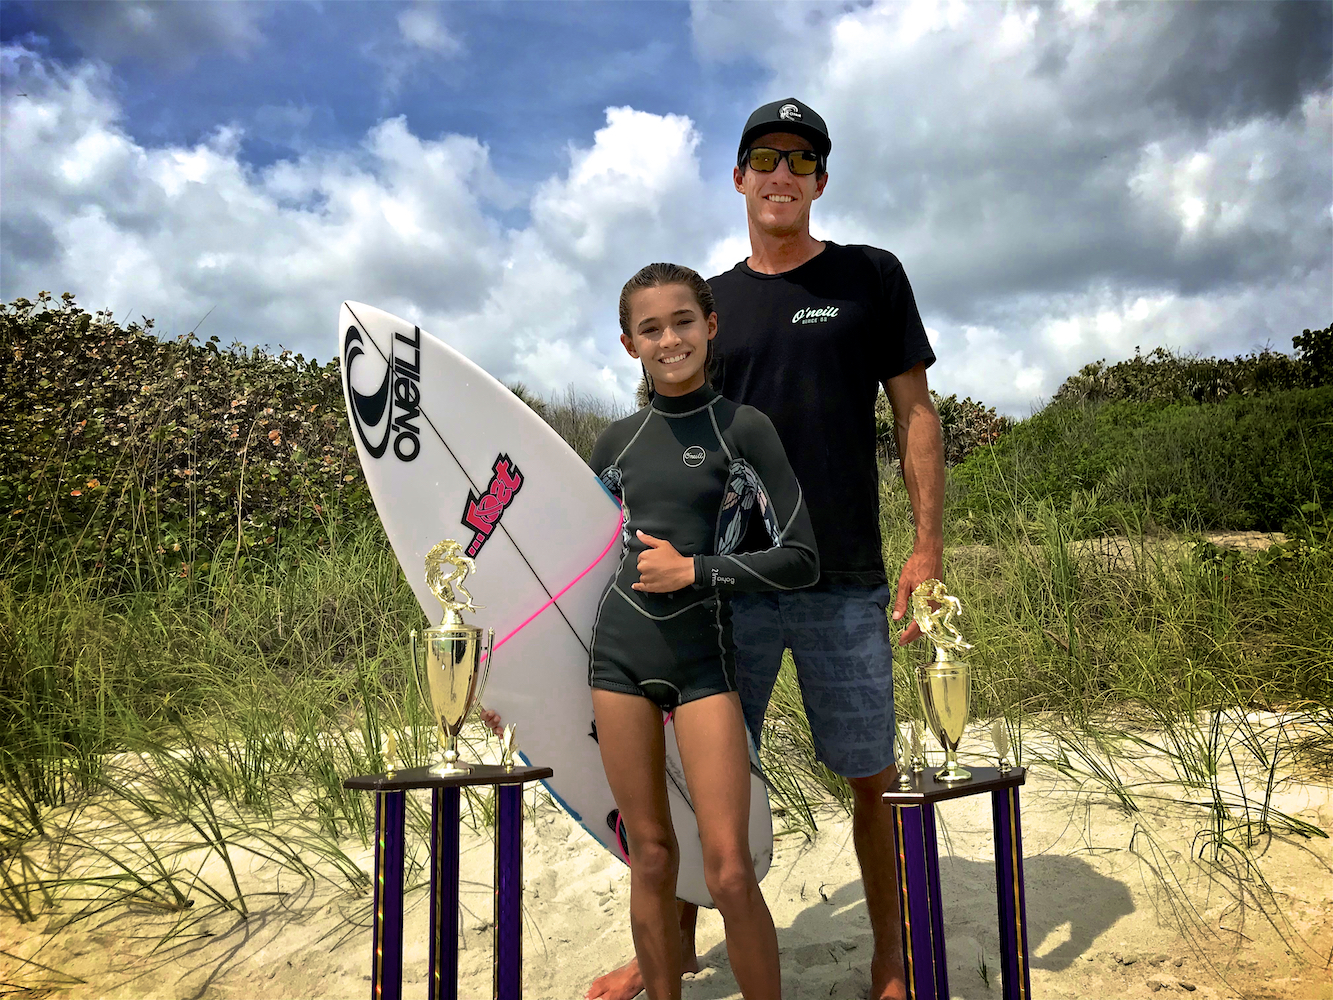 The road to the Eastern Surfing Associations 2021 East Coast Surfing Championships: Part 1